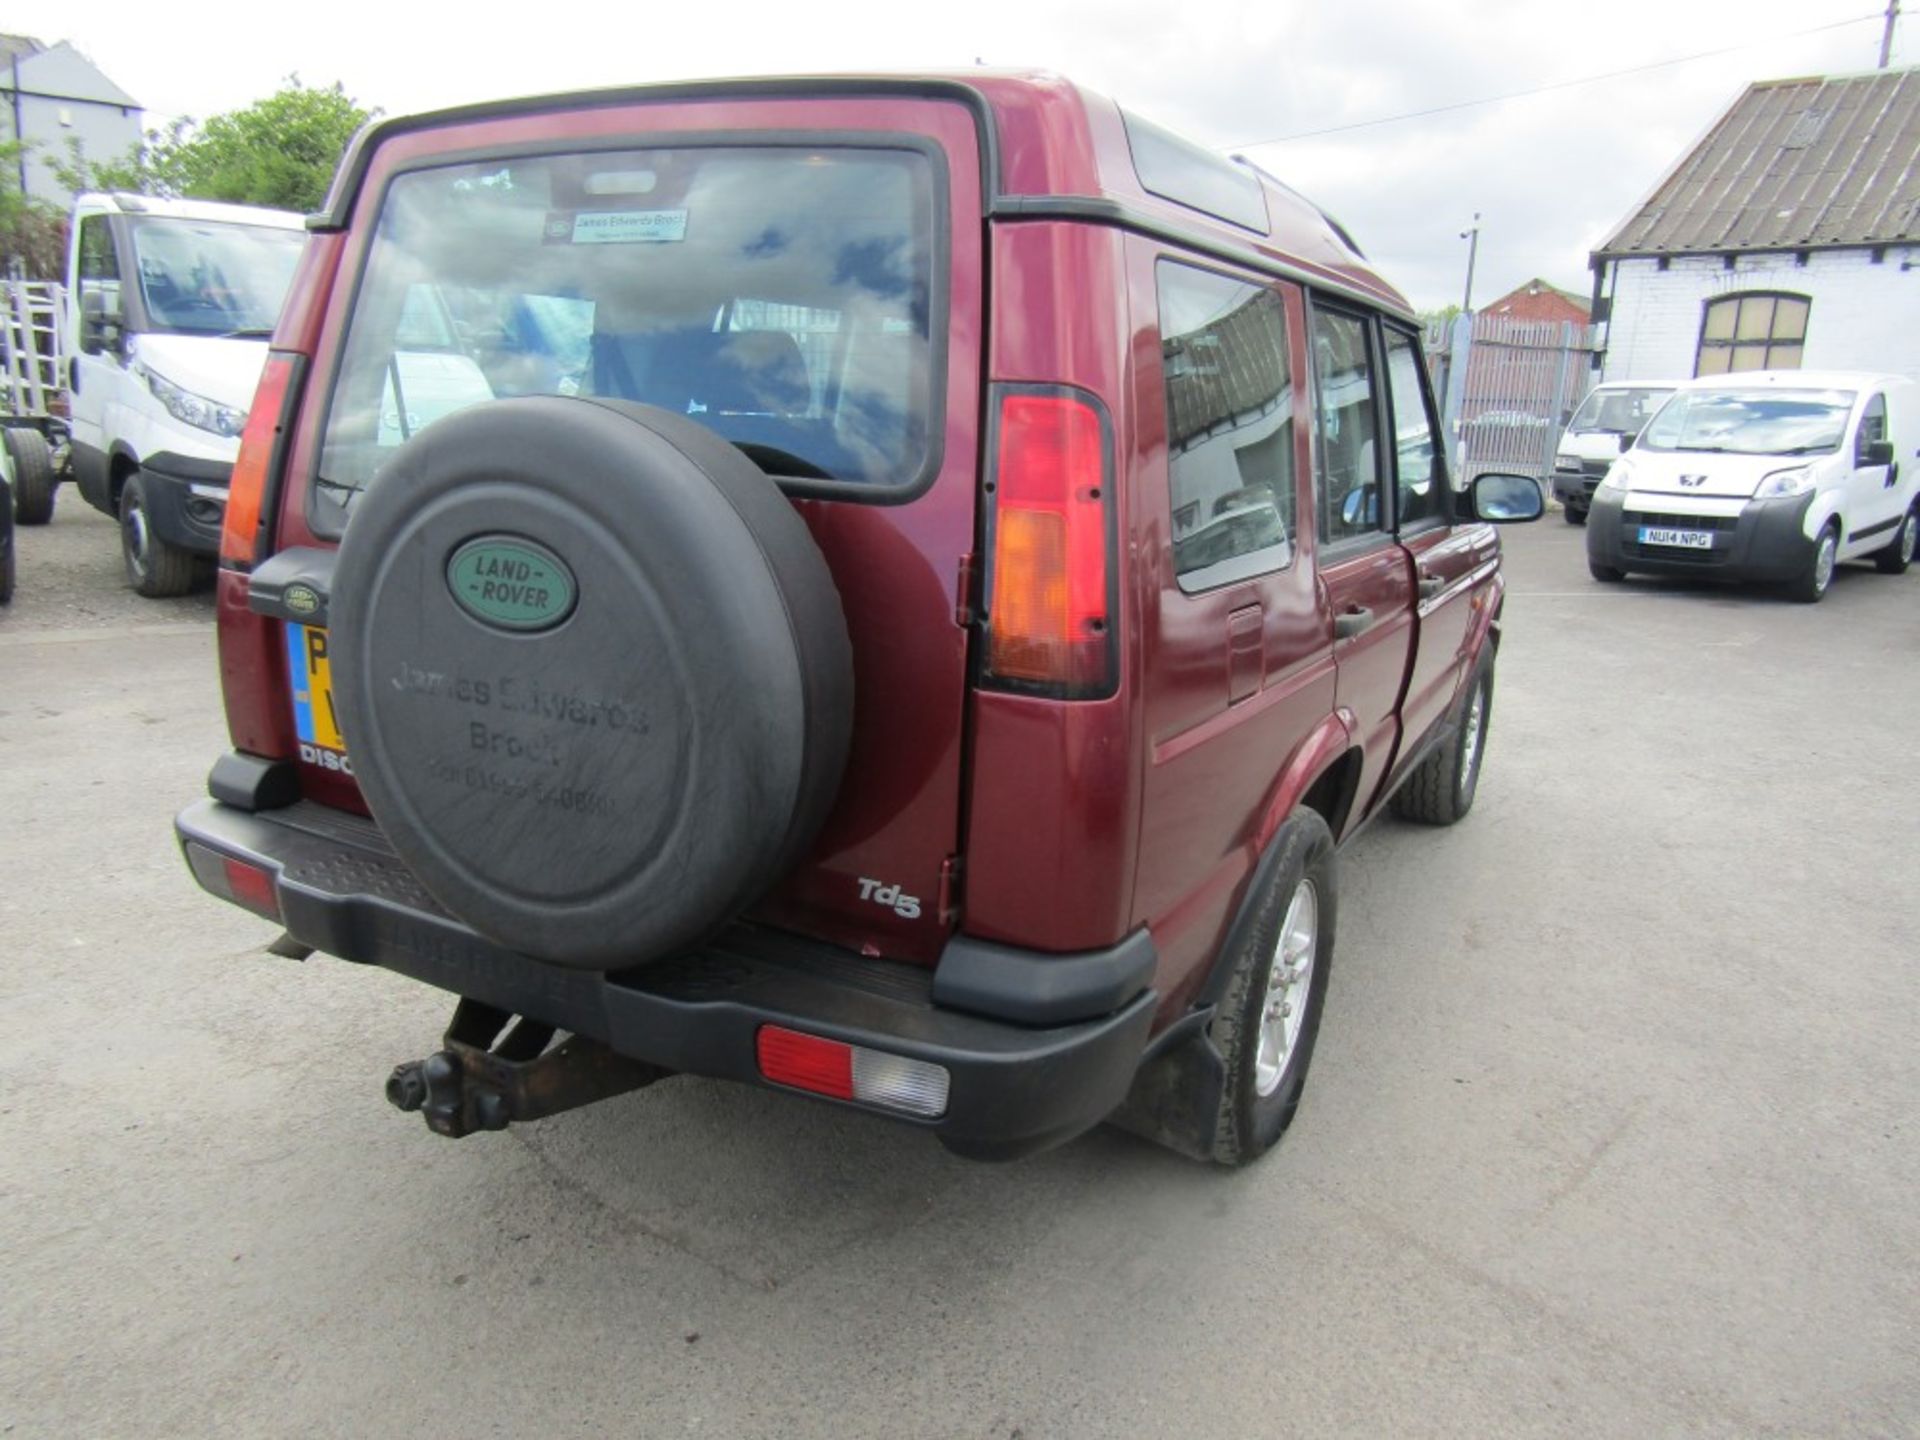 53 reg LAND ROVER DISCOVERY TD5 S, 1ST REG 09/03, TEST 09/22, 216492M, V5 HERE, 1 FORMER KEEPER [ - Image 4 of 7